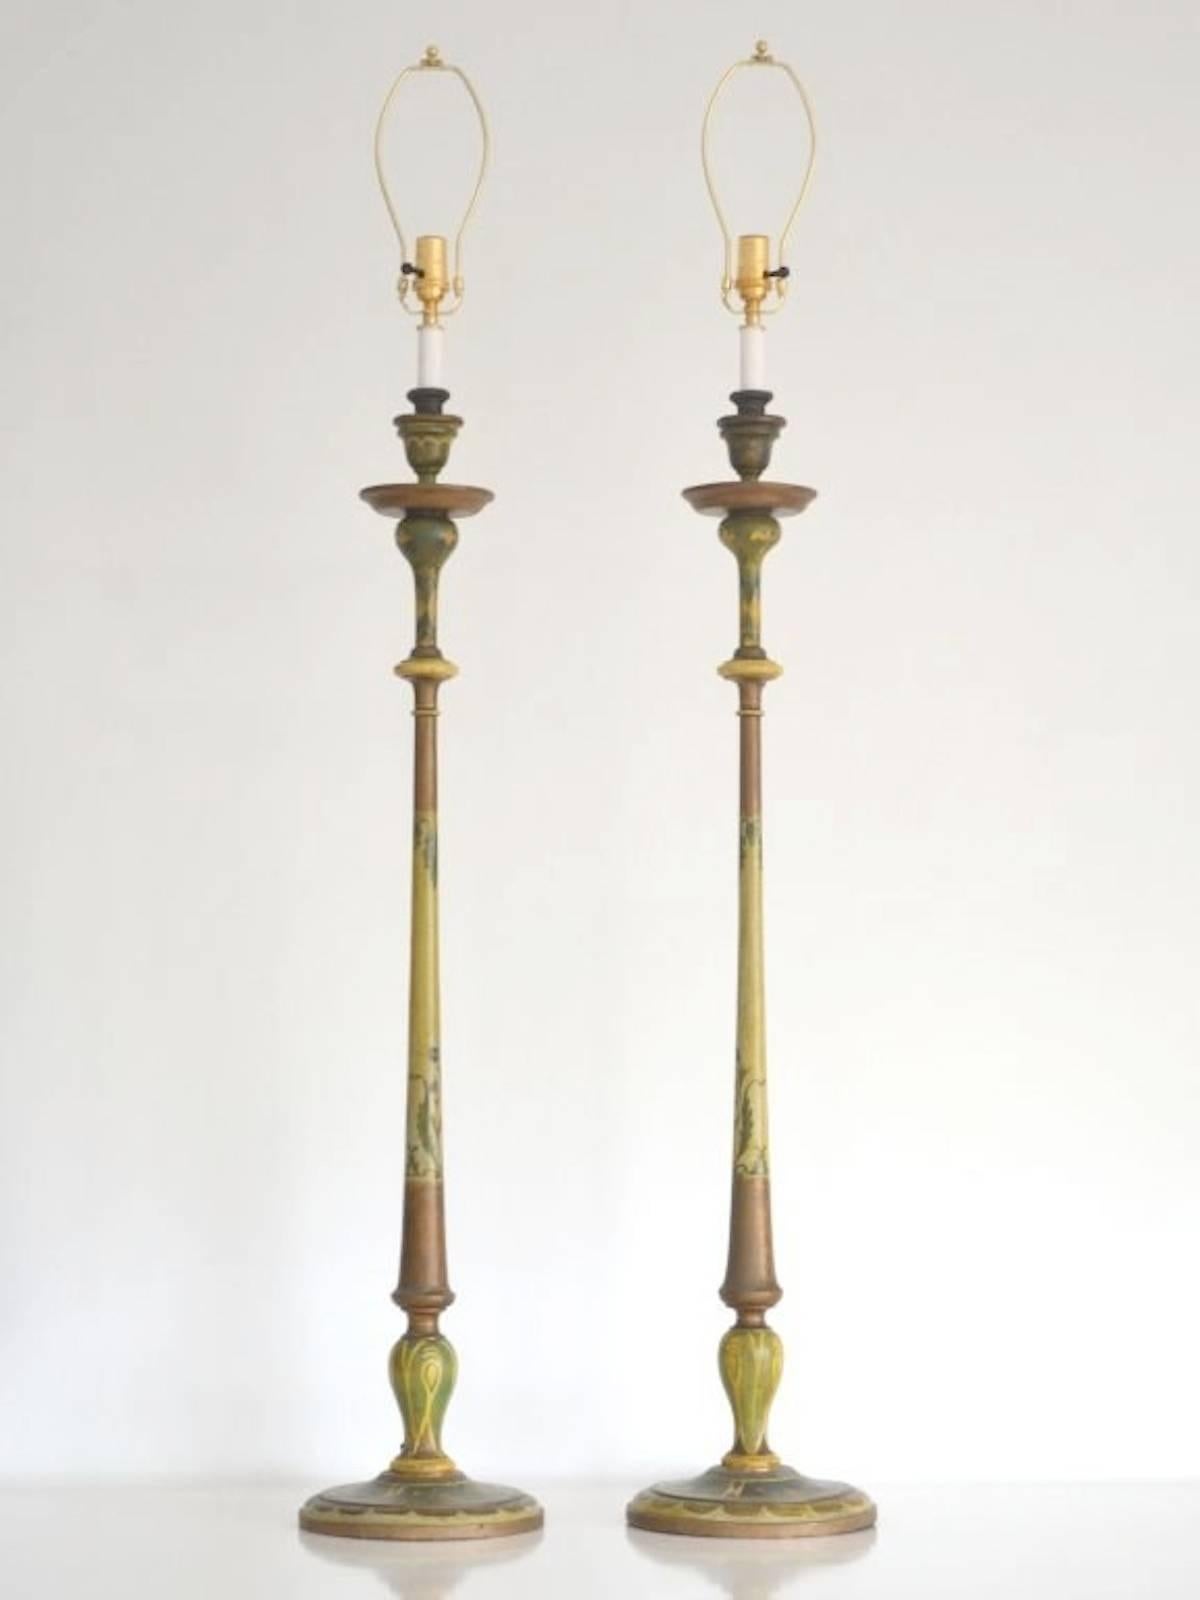 Stunning pair of Venetian hand-painted carved wood candlesticks table lamps, circa 1920s. These artisan crafted Italian lamps are rewired with brass fittings. Shades not included.
Measurements: The height of the lamps from the base to the top of the